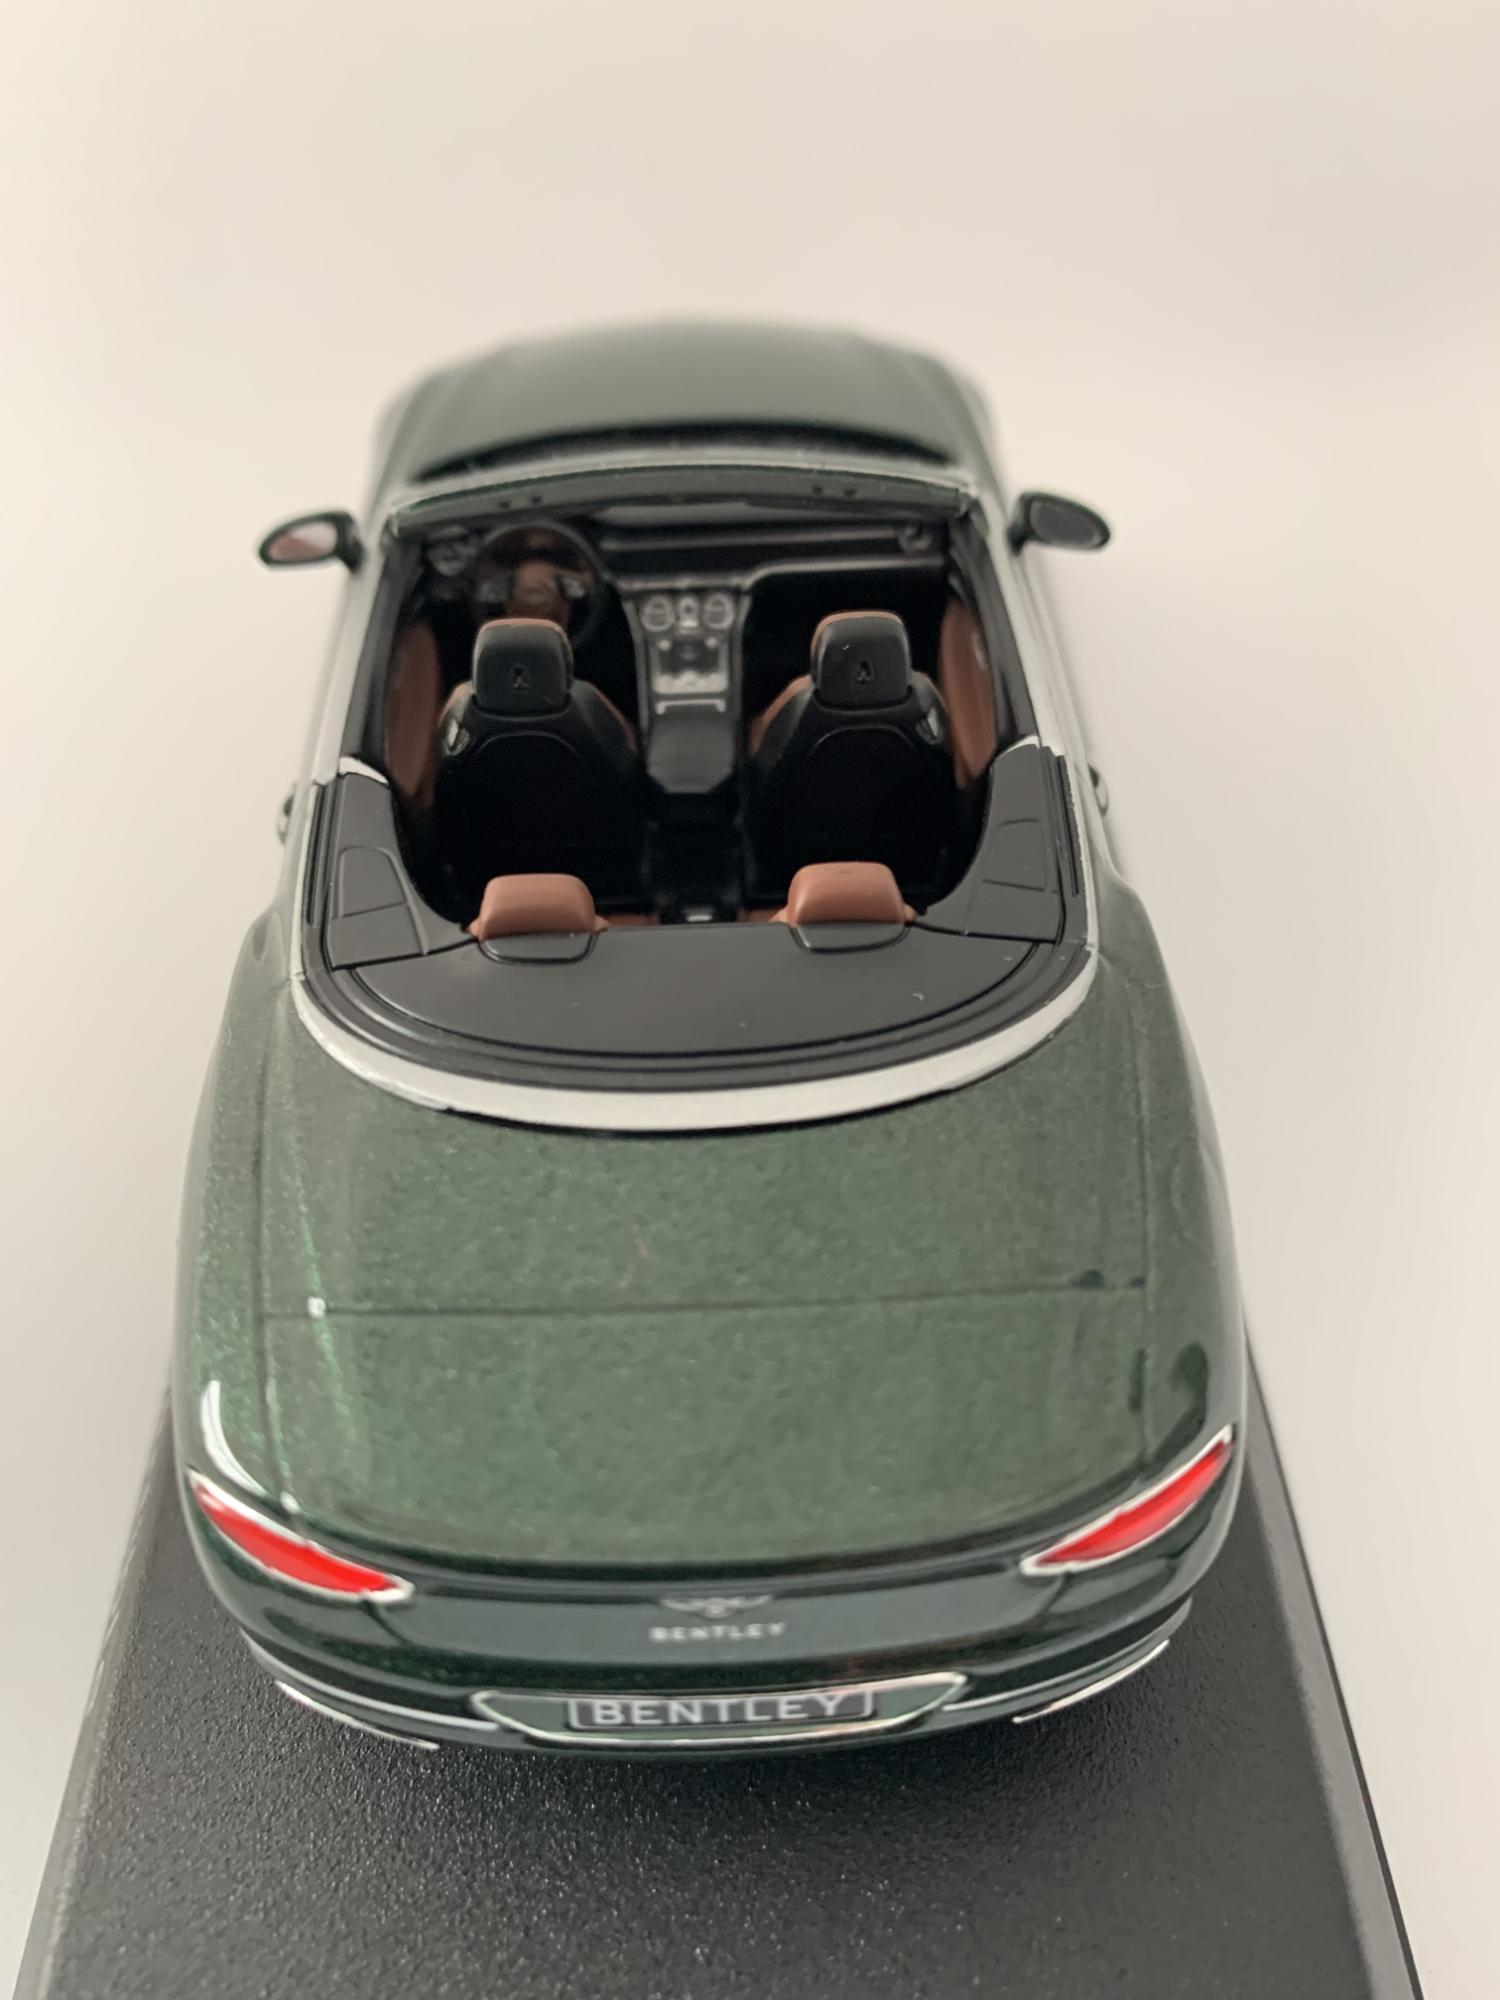 An excellent reproduction of the Bentley Continental GT Convertible with detail throughout, all authentically recreated. Model is mounted on a removable plinth with a removable hard plastic cover